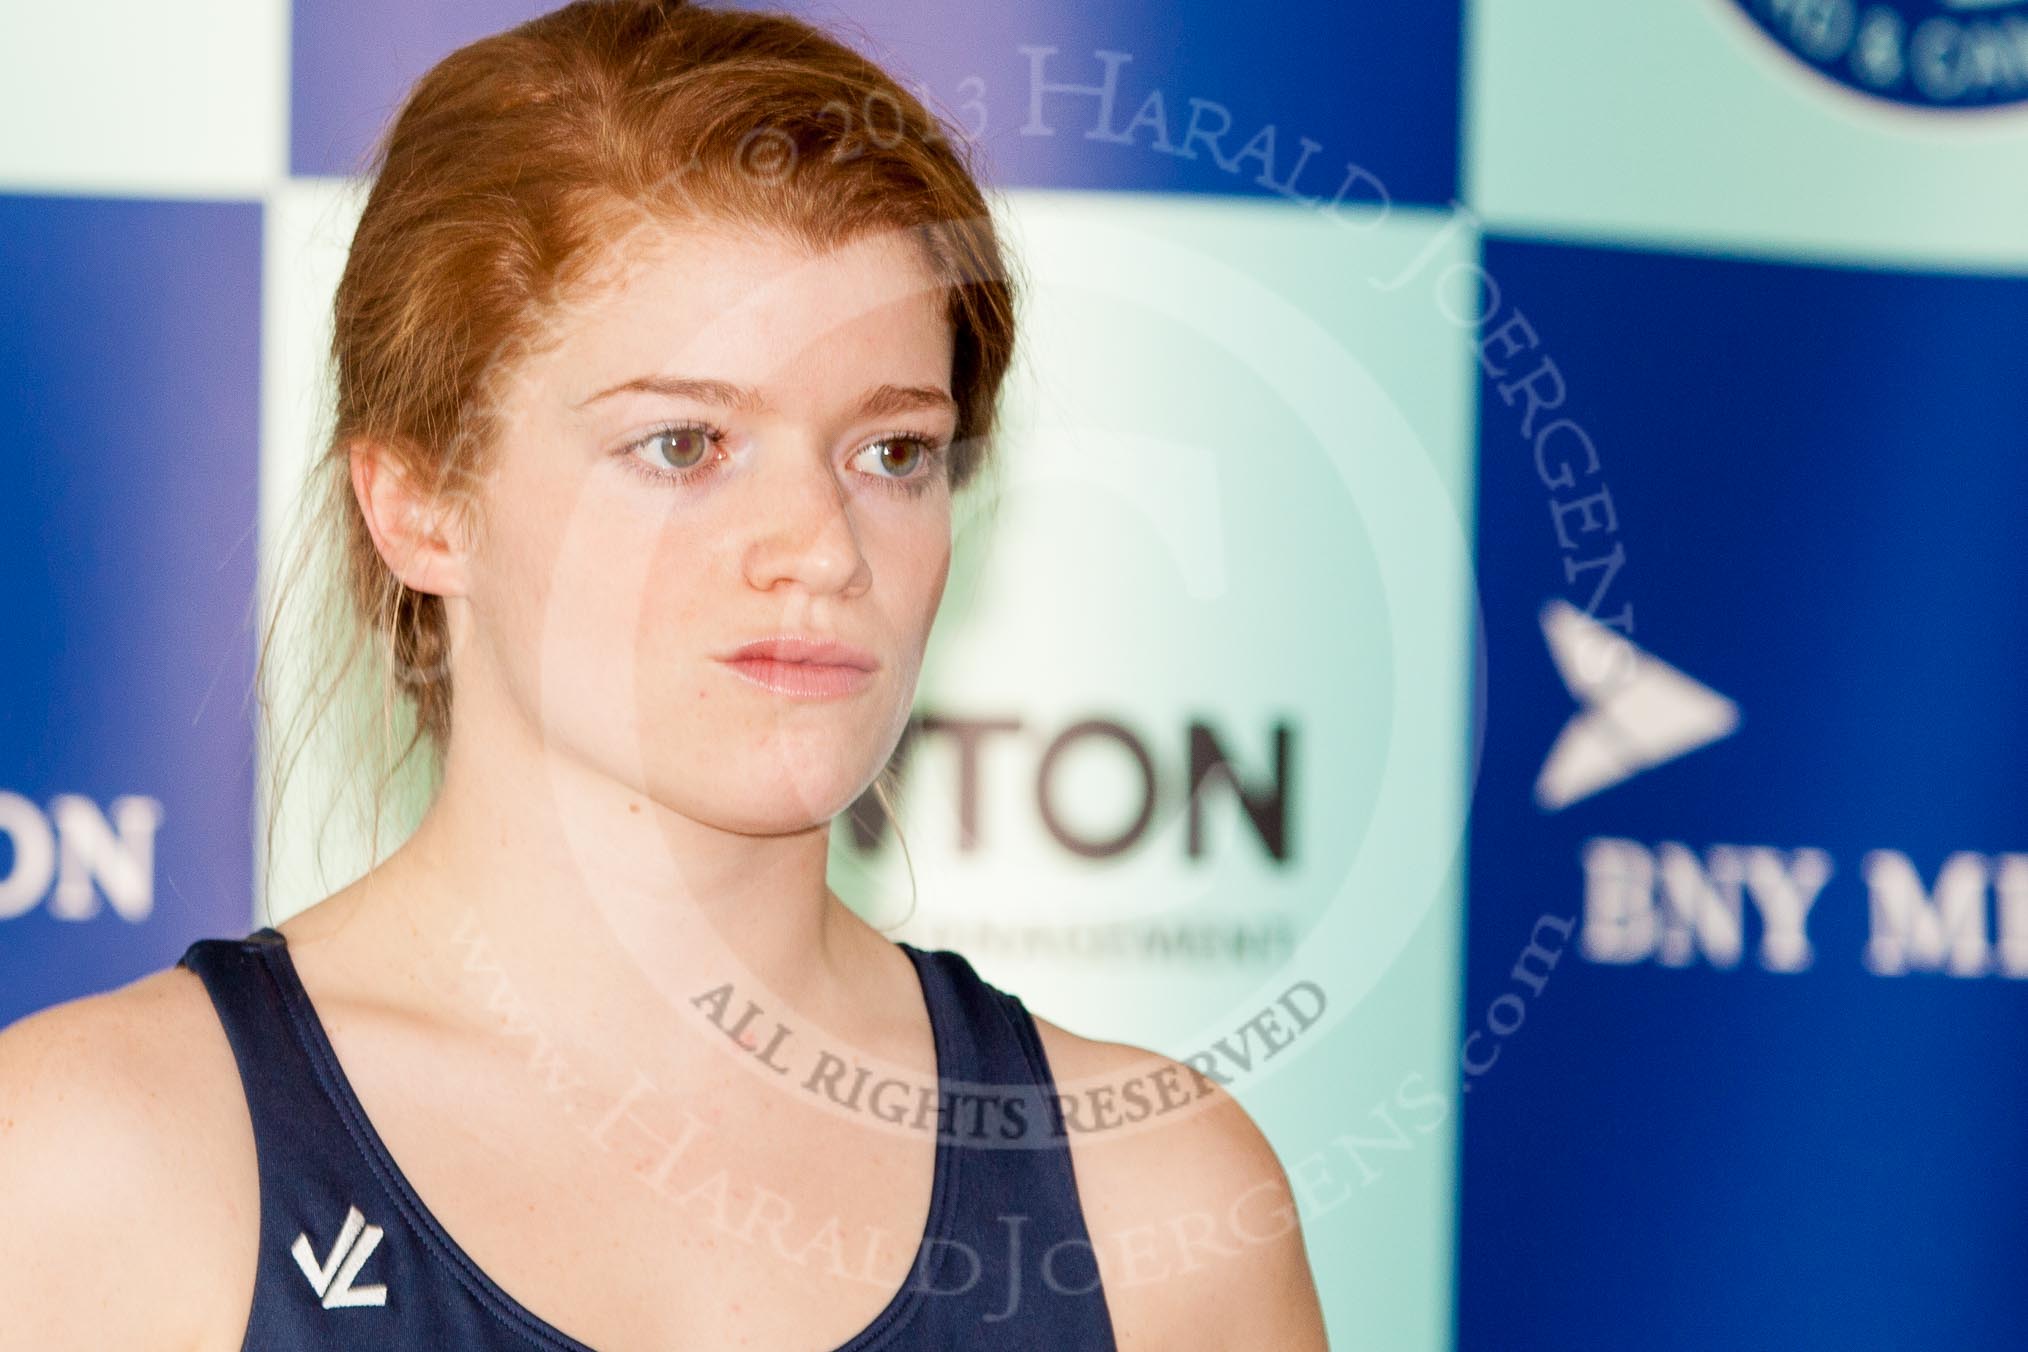 The Boat Race season 2013 - Crew Announcement and Weigh In: The crew for the 2013 Women's Boat Race: Cox for Oxford - Katie Apfelbaum - 53.2kg..
BNY Mellon Centre,
London EC4V 4LA,

United Kingdom,
on 04 March 2013 at 10:21, image #33